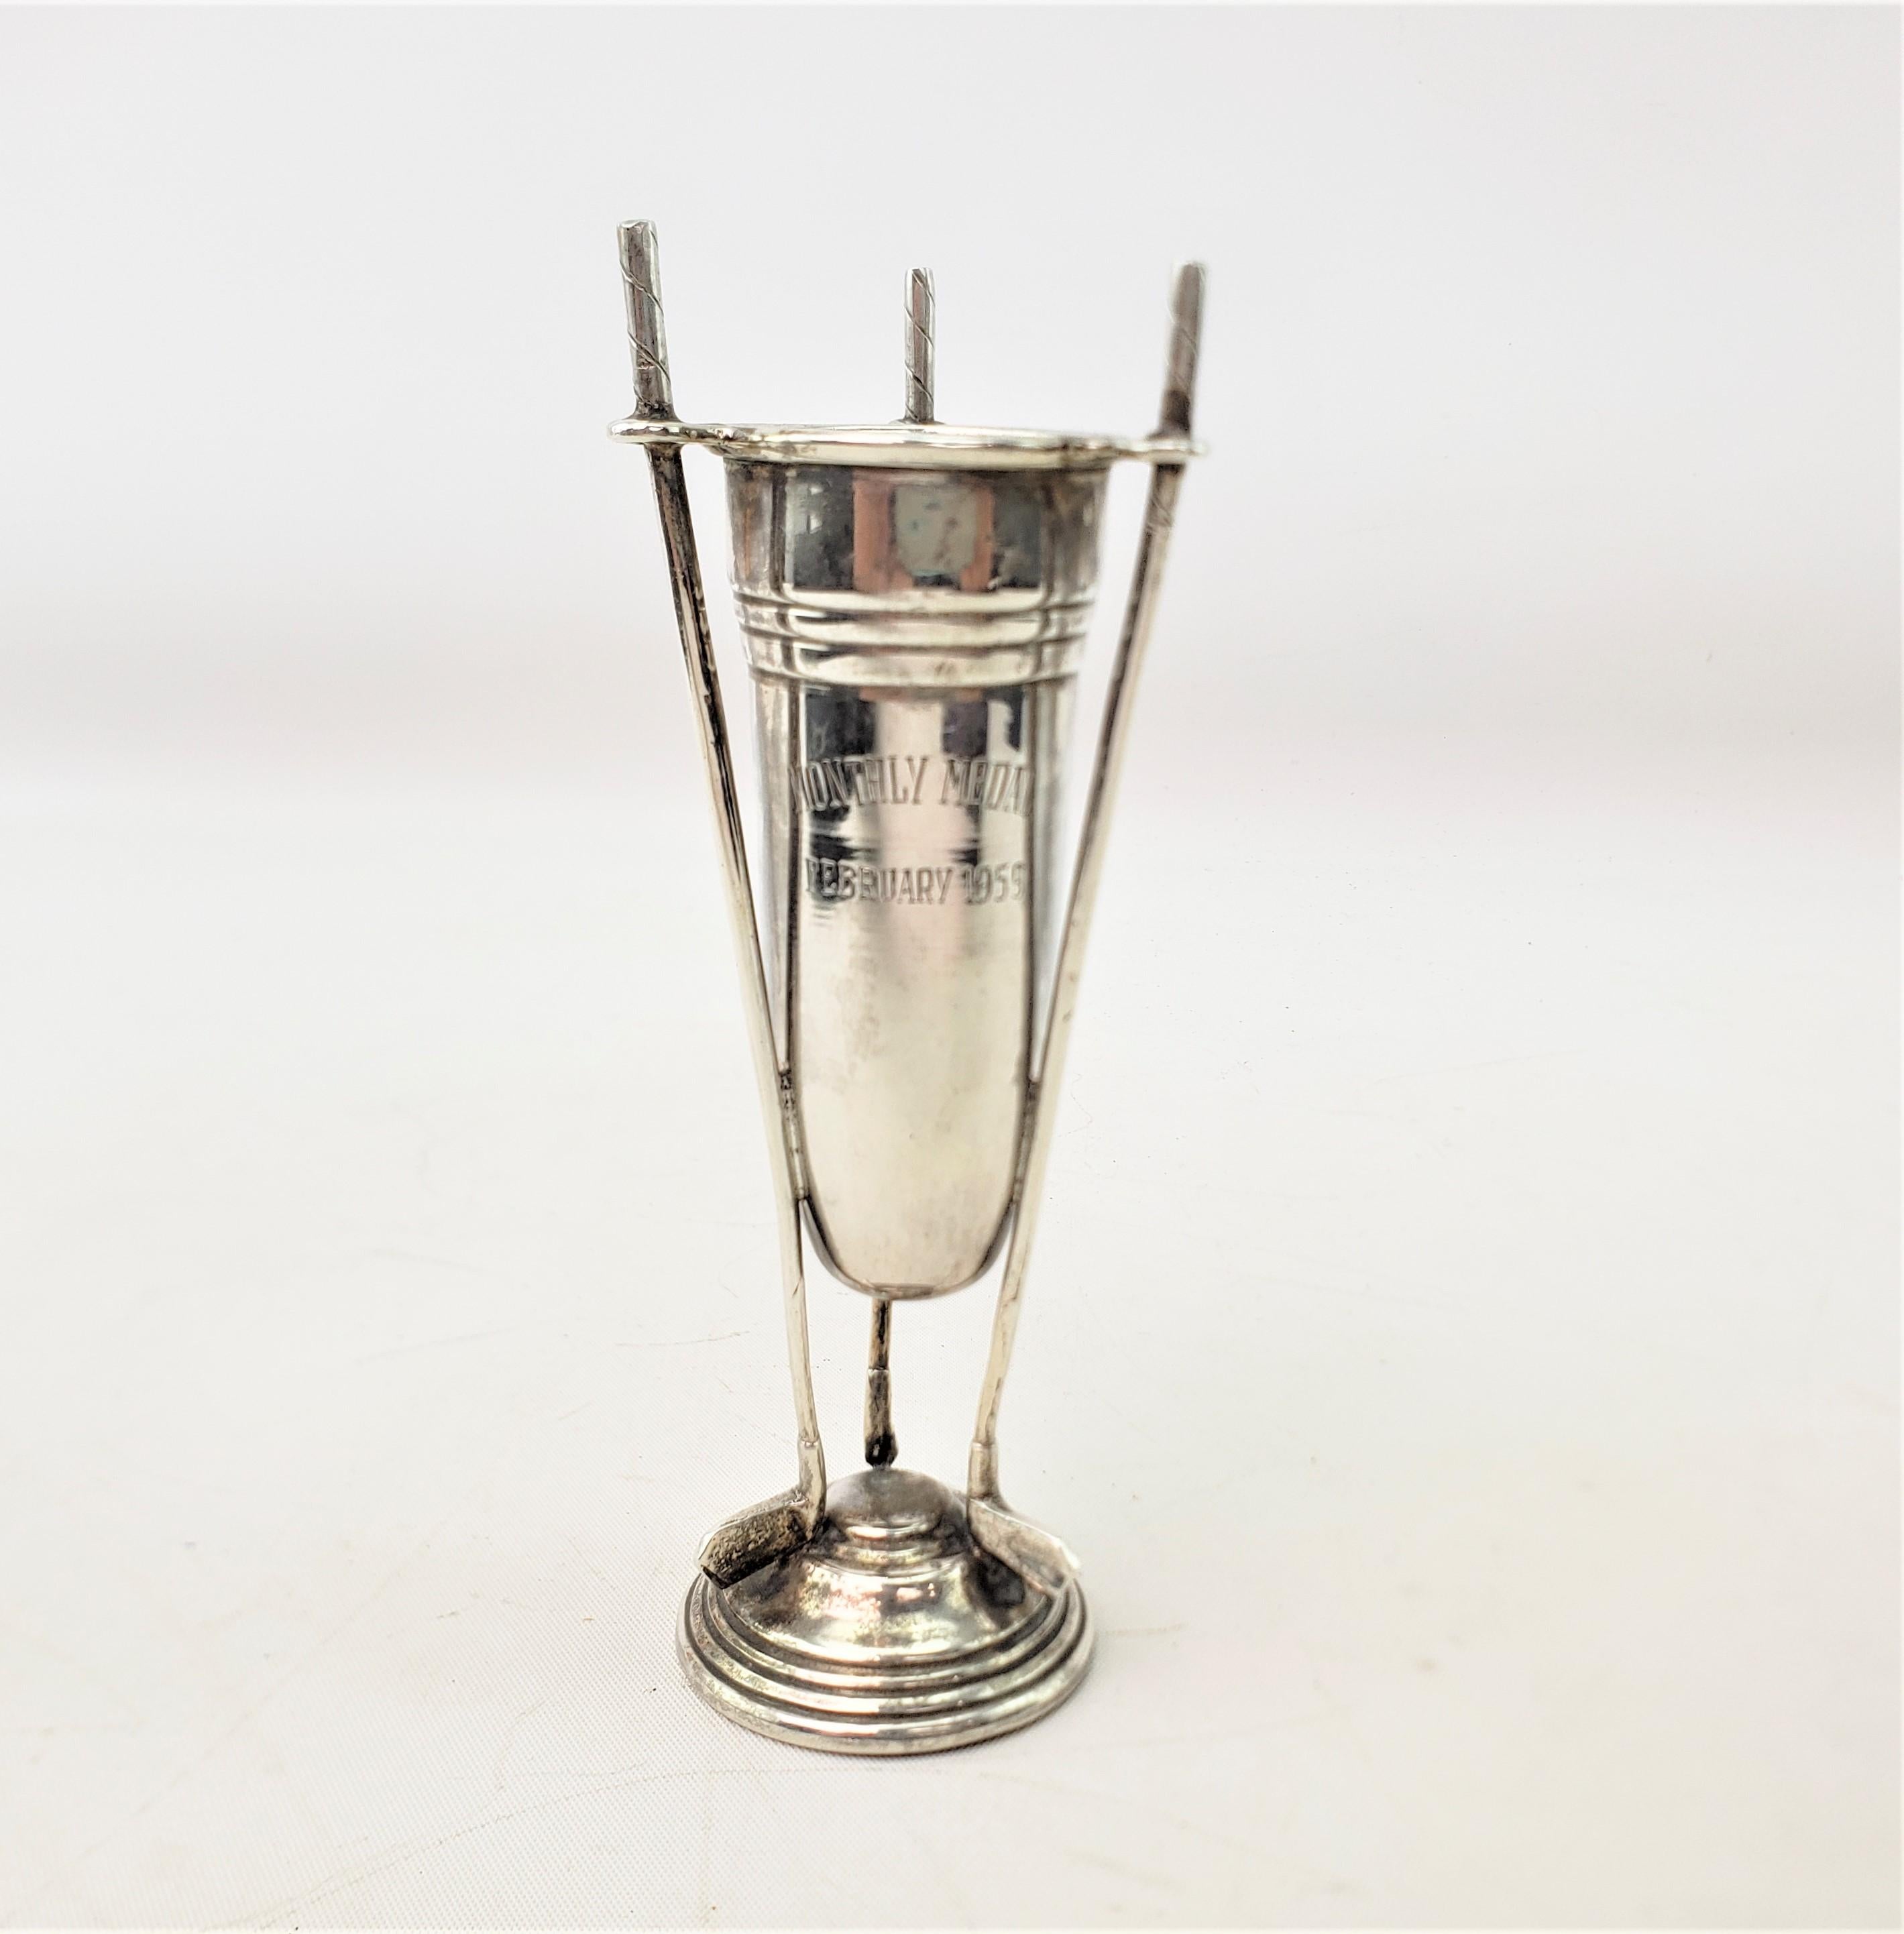 This vintage miniature trophy has no maker's mark, but is presumed to have originated from the United States and date to approximately 1959 and done in the period Mid-Century Modern style. The trophy is composed of sterling silver and features three